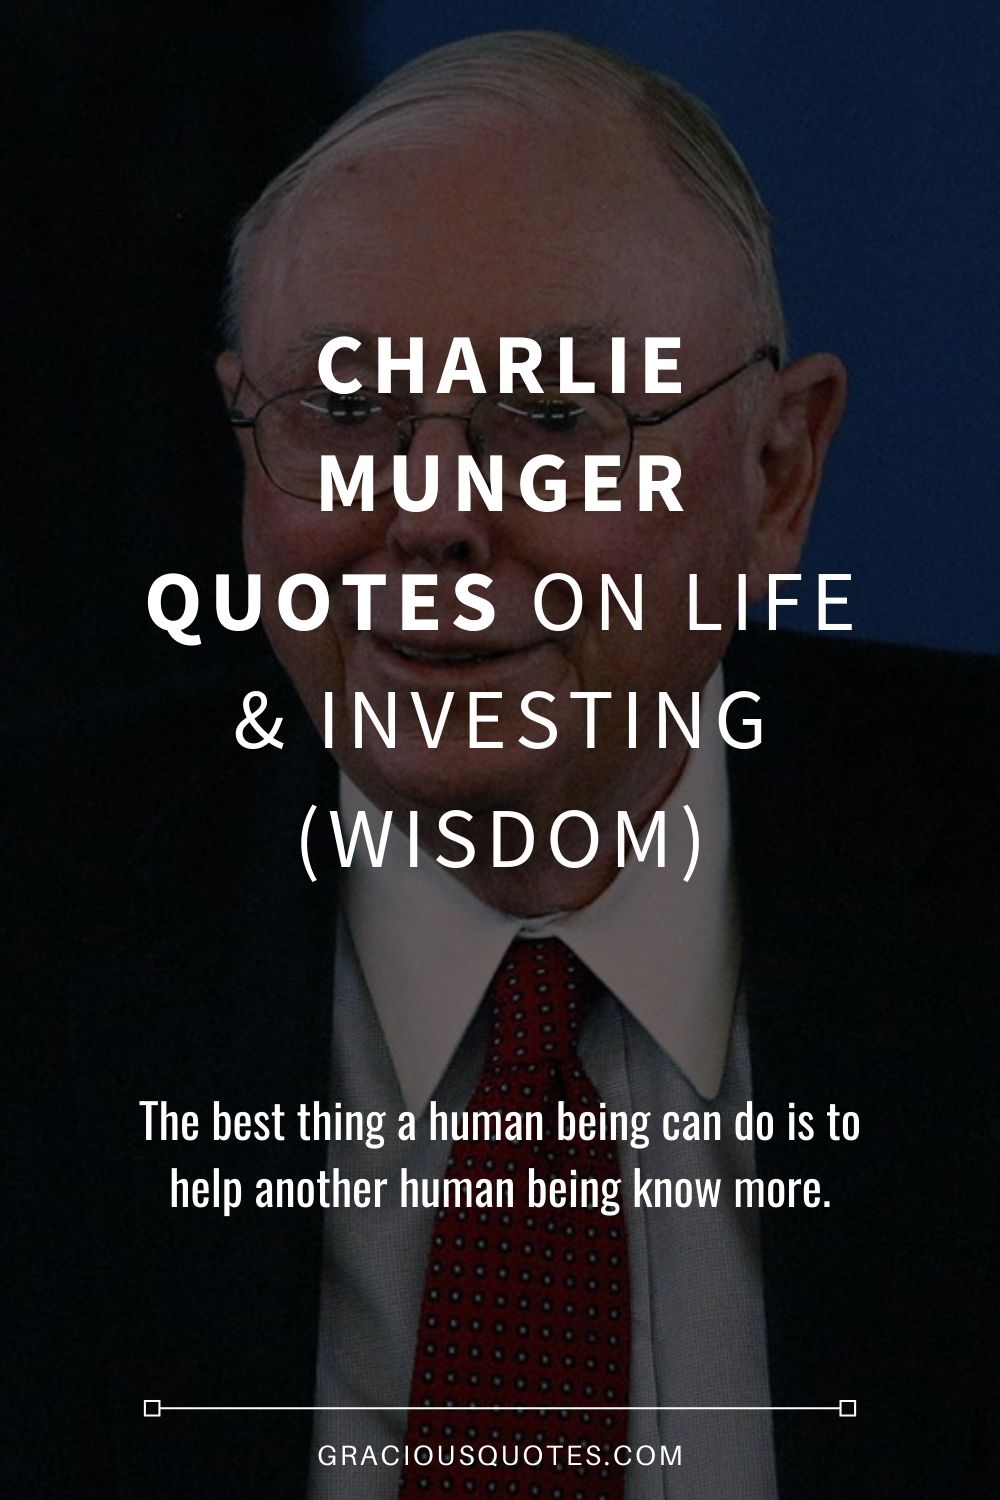 Charlie Munger Quotes on Life & Investing (WISDOM) - Gracious Quotes